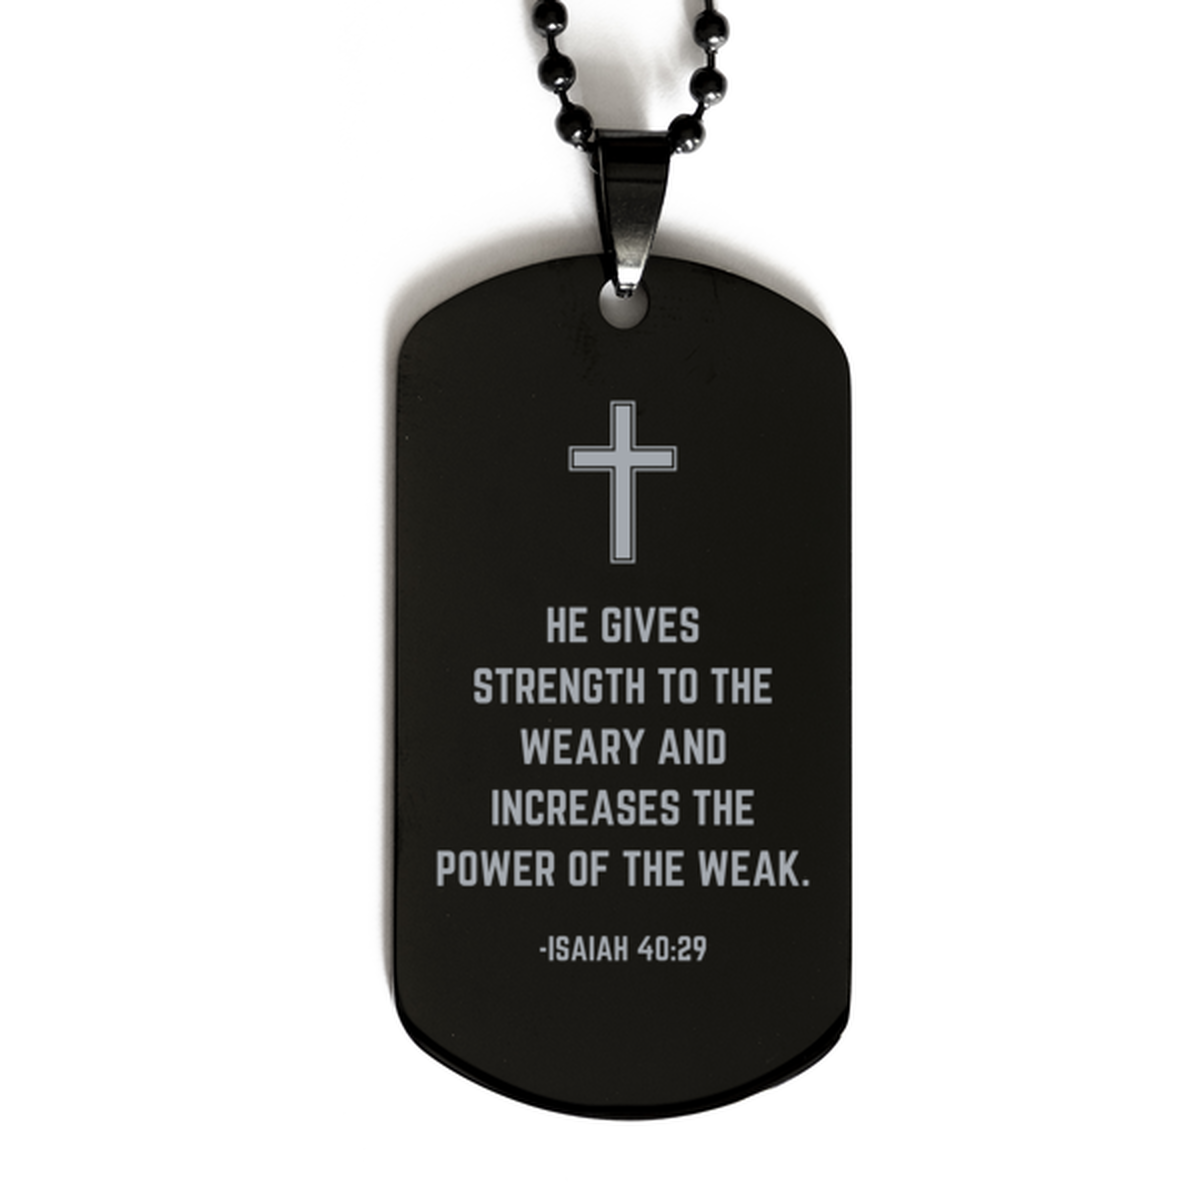 Baptism Gifts For Teenage Boys Girls, Christian Bible Verse Black Dog Tag, He gives strength to the weary, Confirmation Gifts, Bible Verse Necklace for Son, Godson, Grandson, Nephew